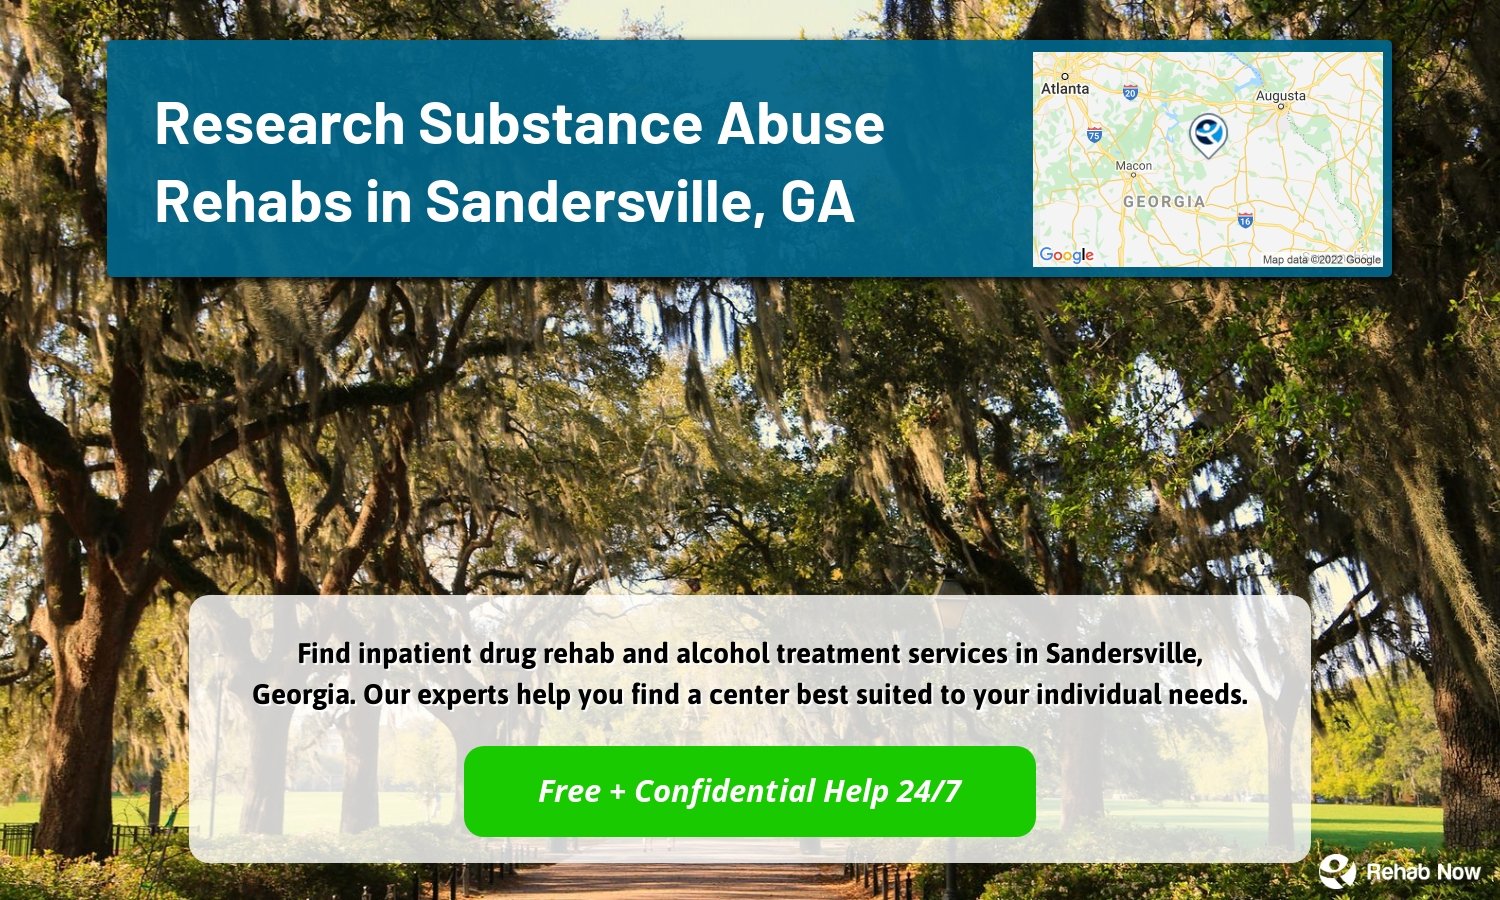 Find inpatient drug rehab and alcohol treatment services in Sandersville, Georgia. Our experts help you find a center best suited to your individual needs.